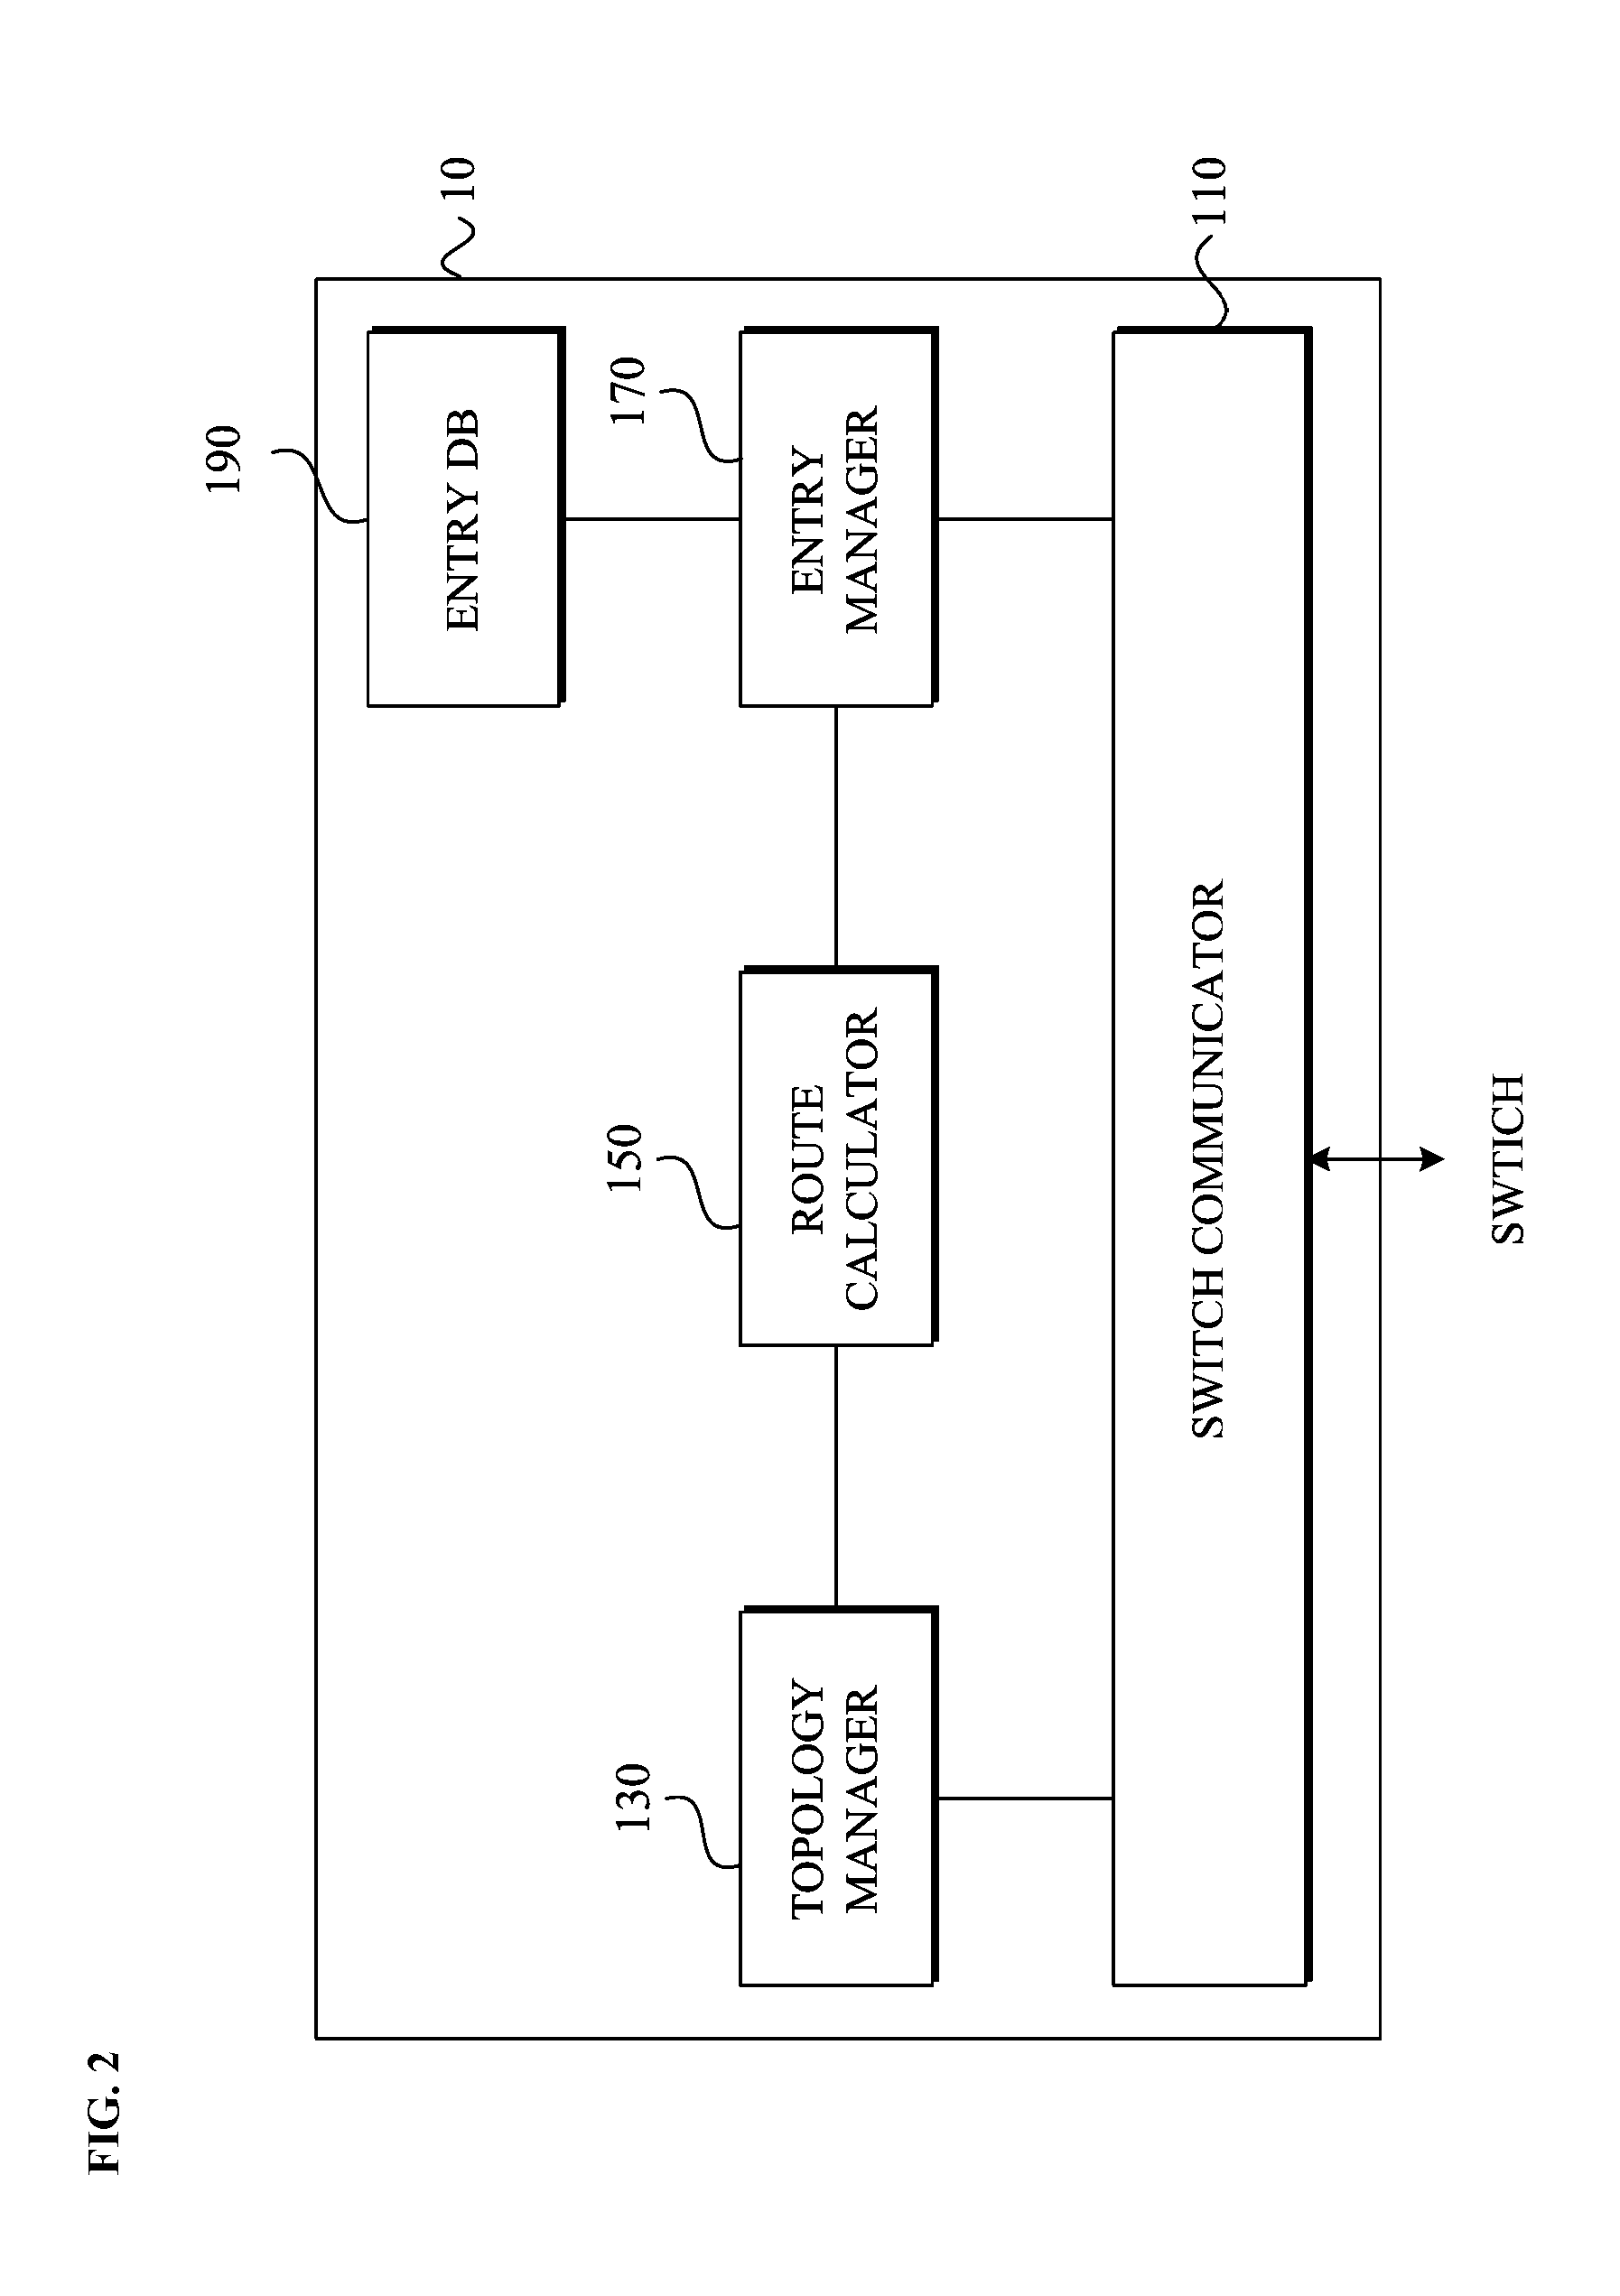 Sdn-based service chaining system